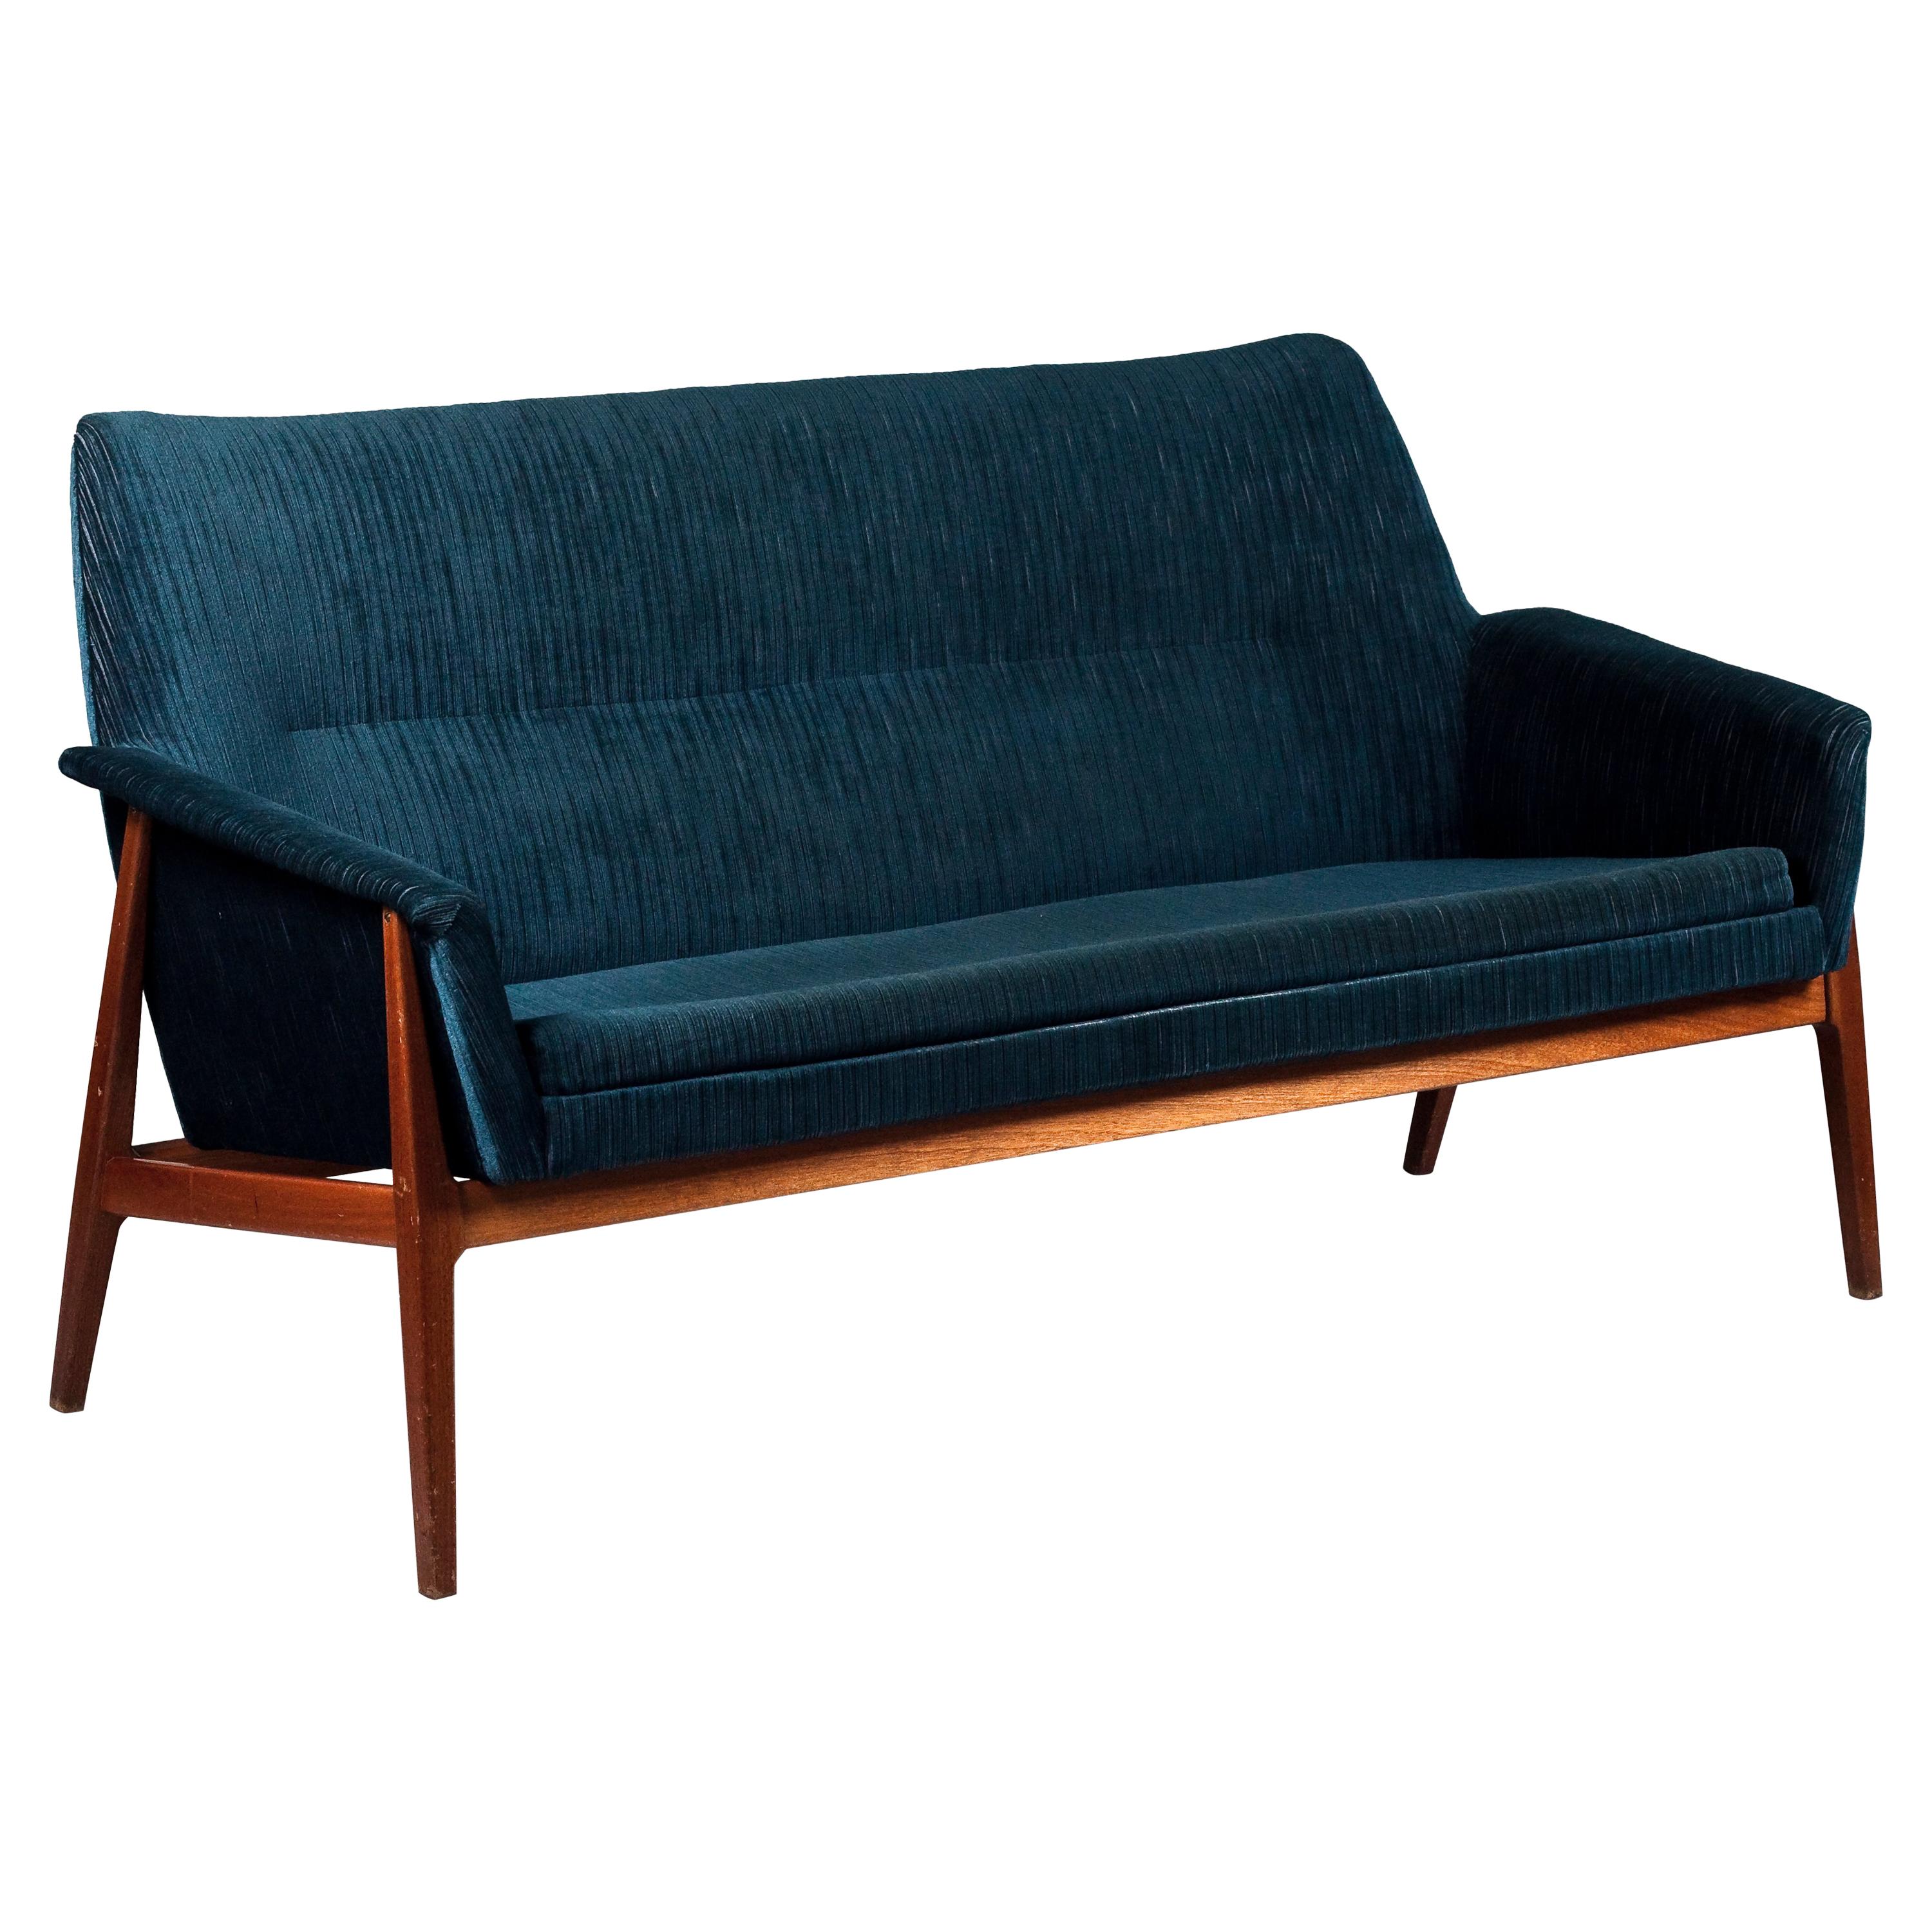 Scandinavian Mid-Century Modern Blue Two Seater Sofa with Teak Legs For Sale